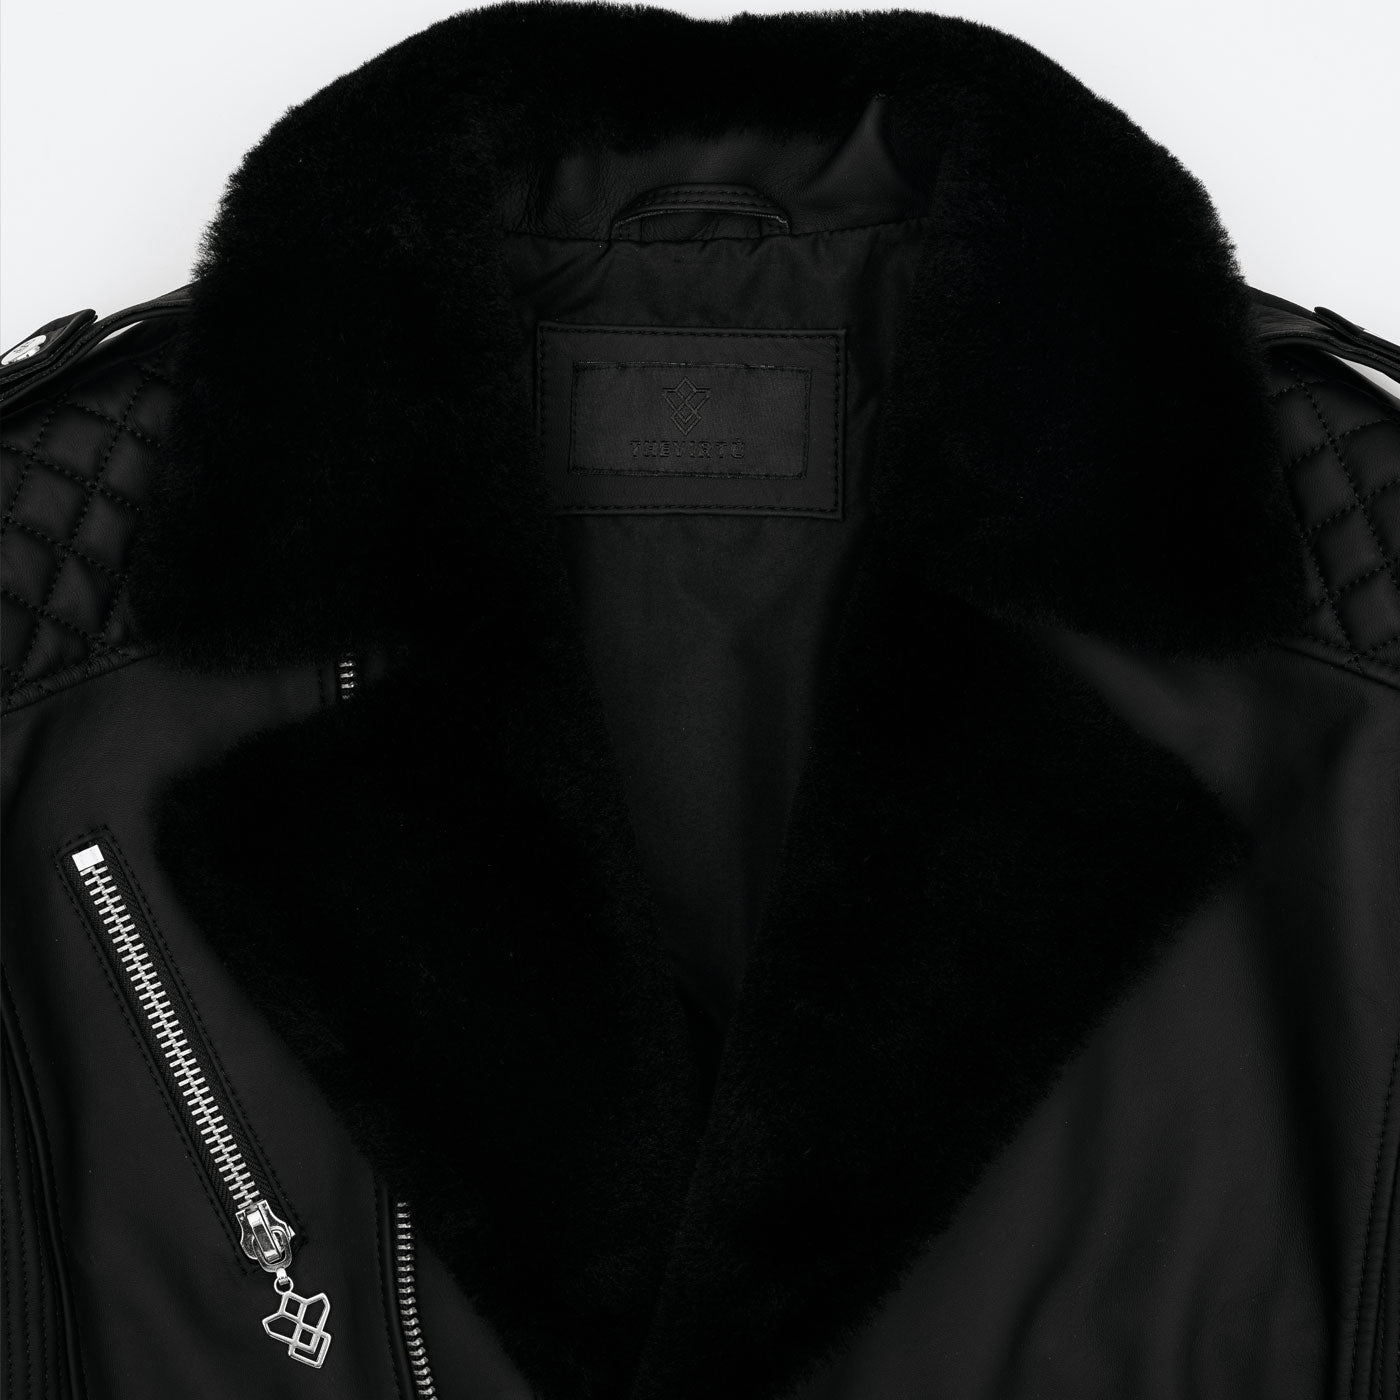 Shearling Panther Black Leather Jacket